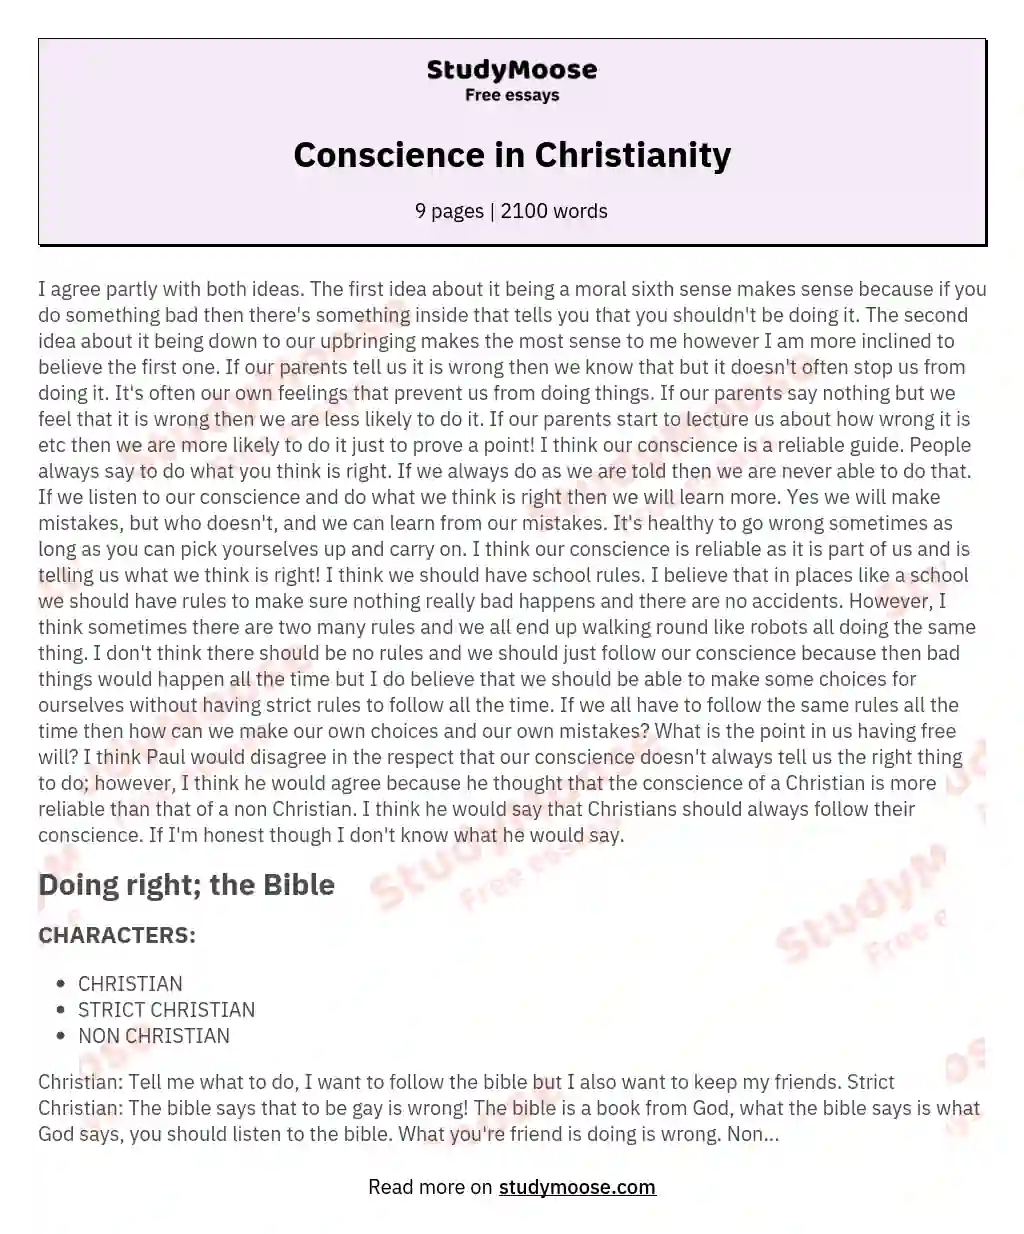 Conscience in Christianity essay